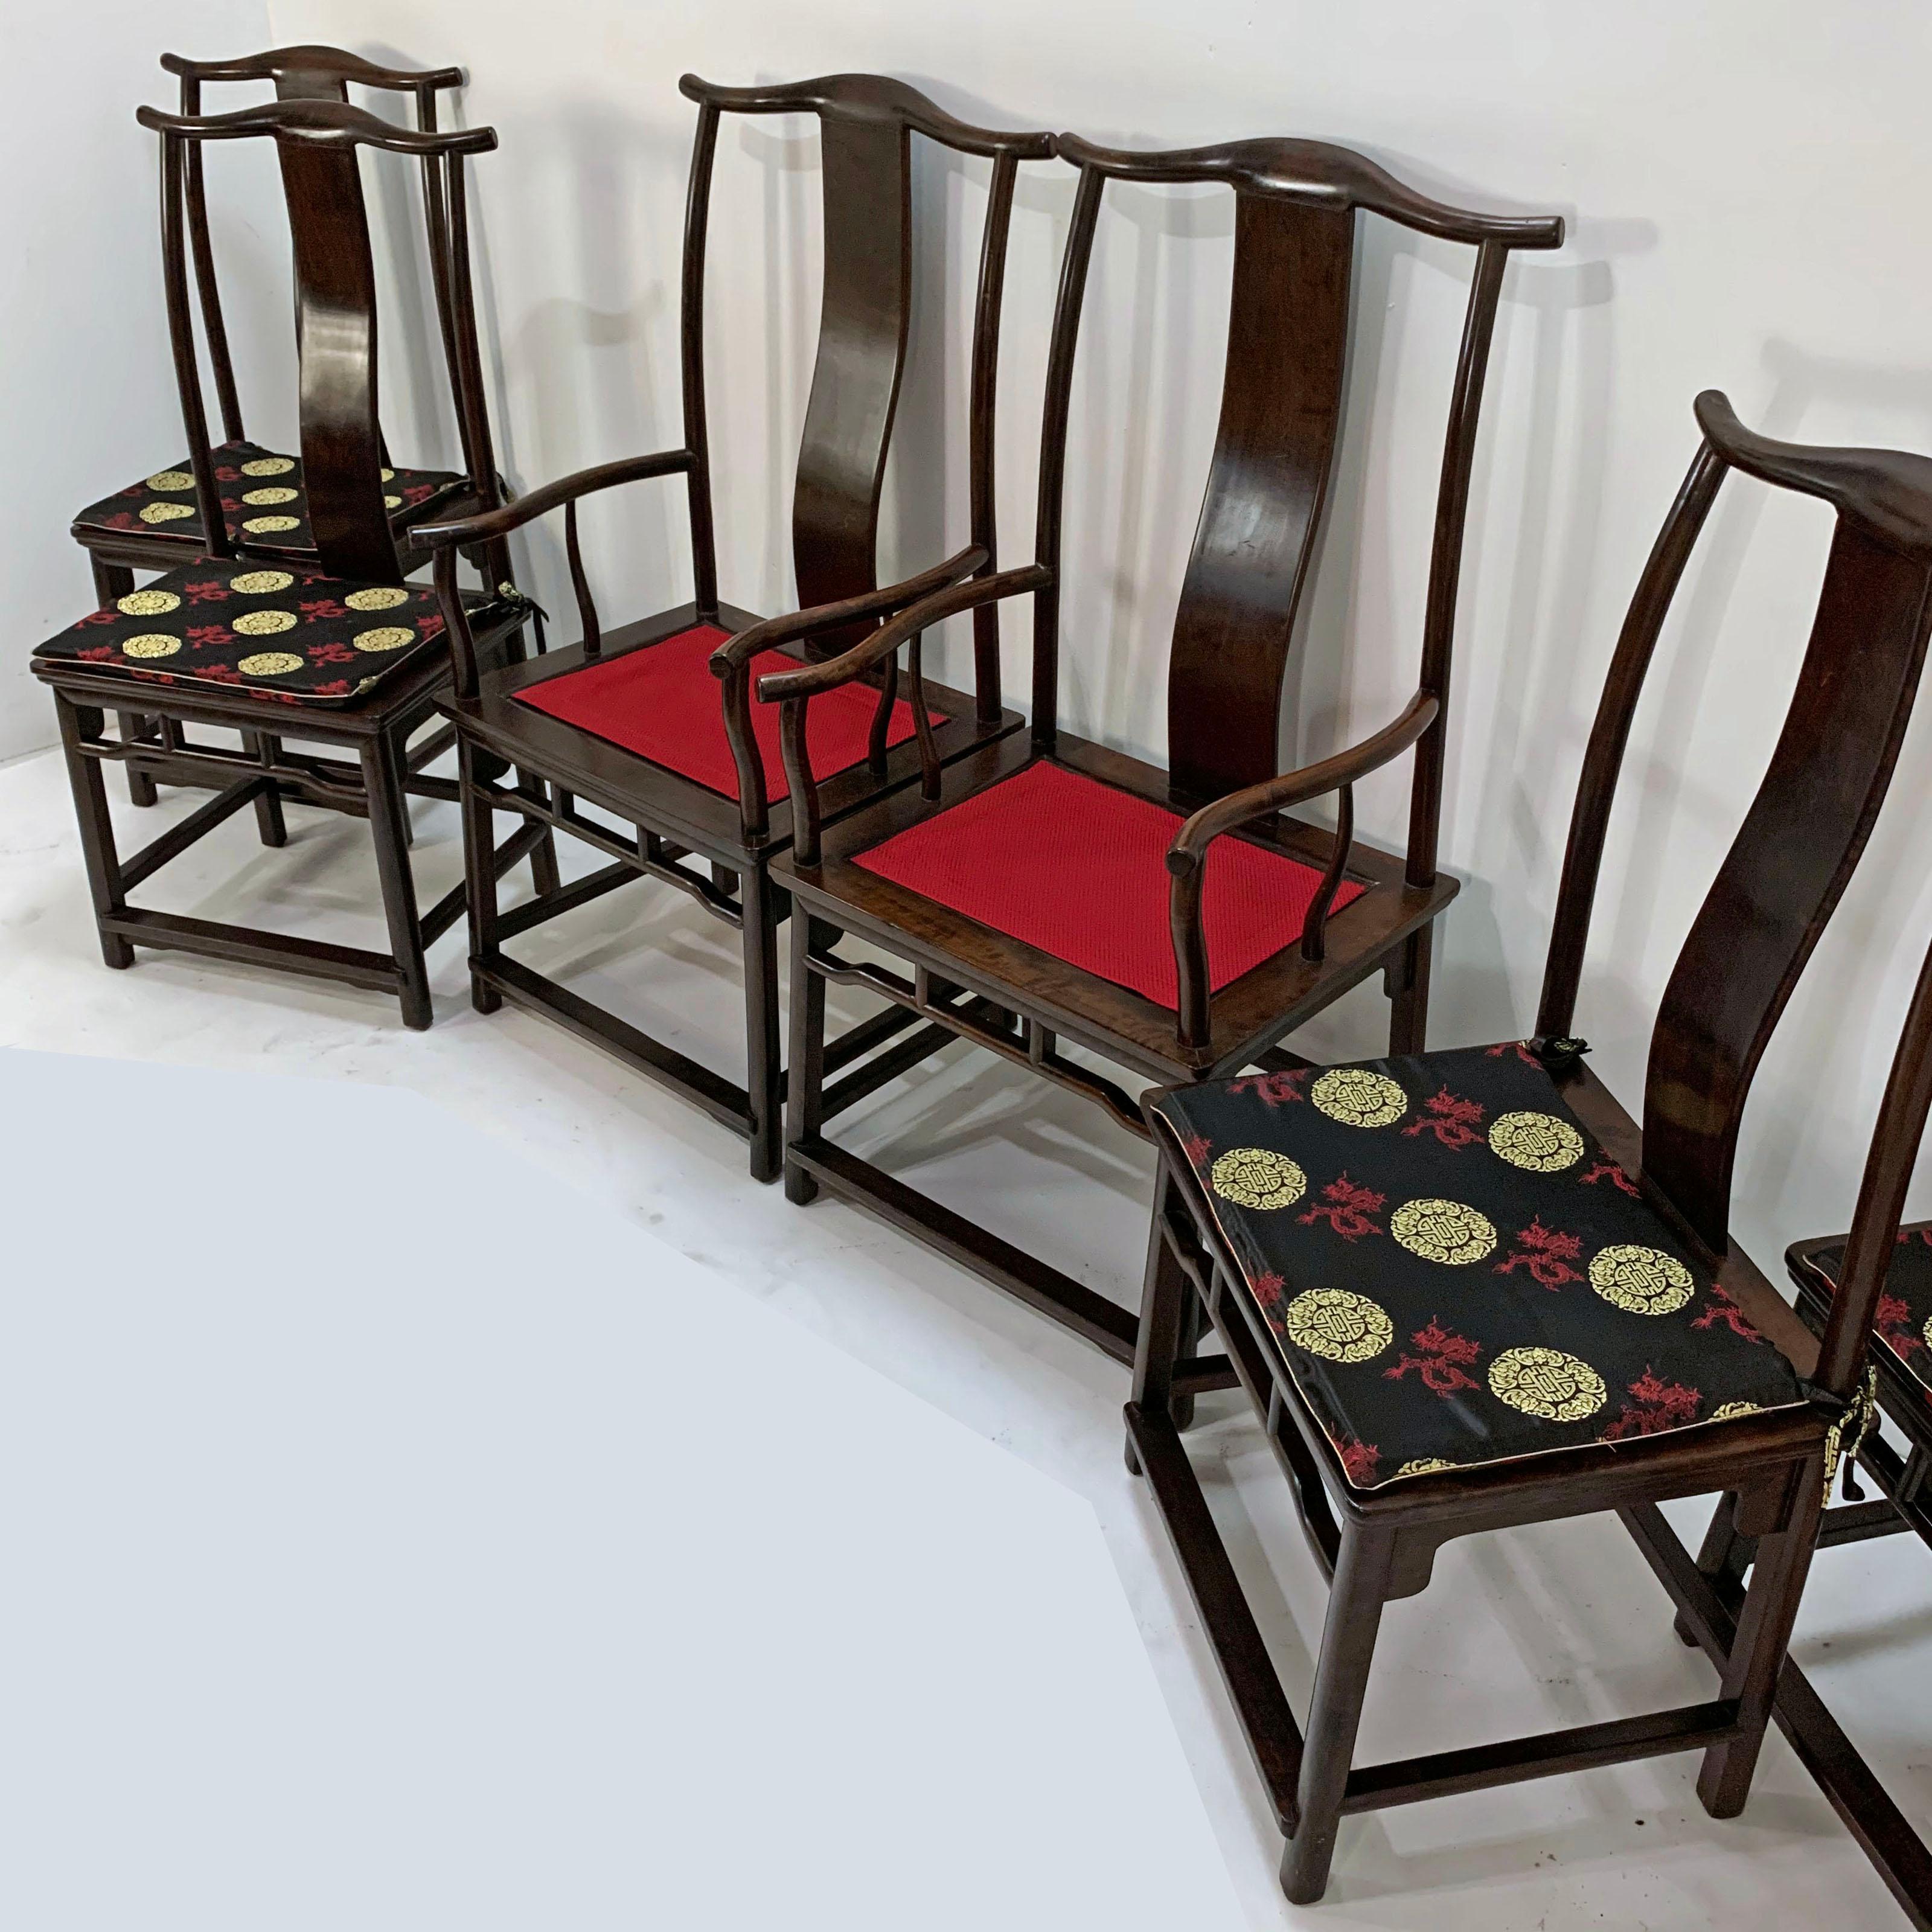 A set of six Classic Chinese Guanmaoyi yokeback chairs in lacquered elmwood consisting of two armchairs and four sides. These elegant high back chairs are named for their resemblance to the winged hats worn by government officials during the Ming